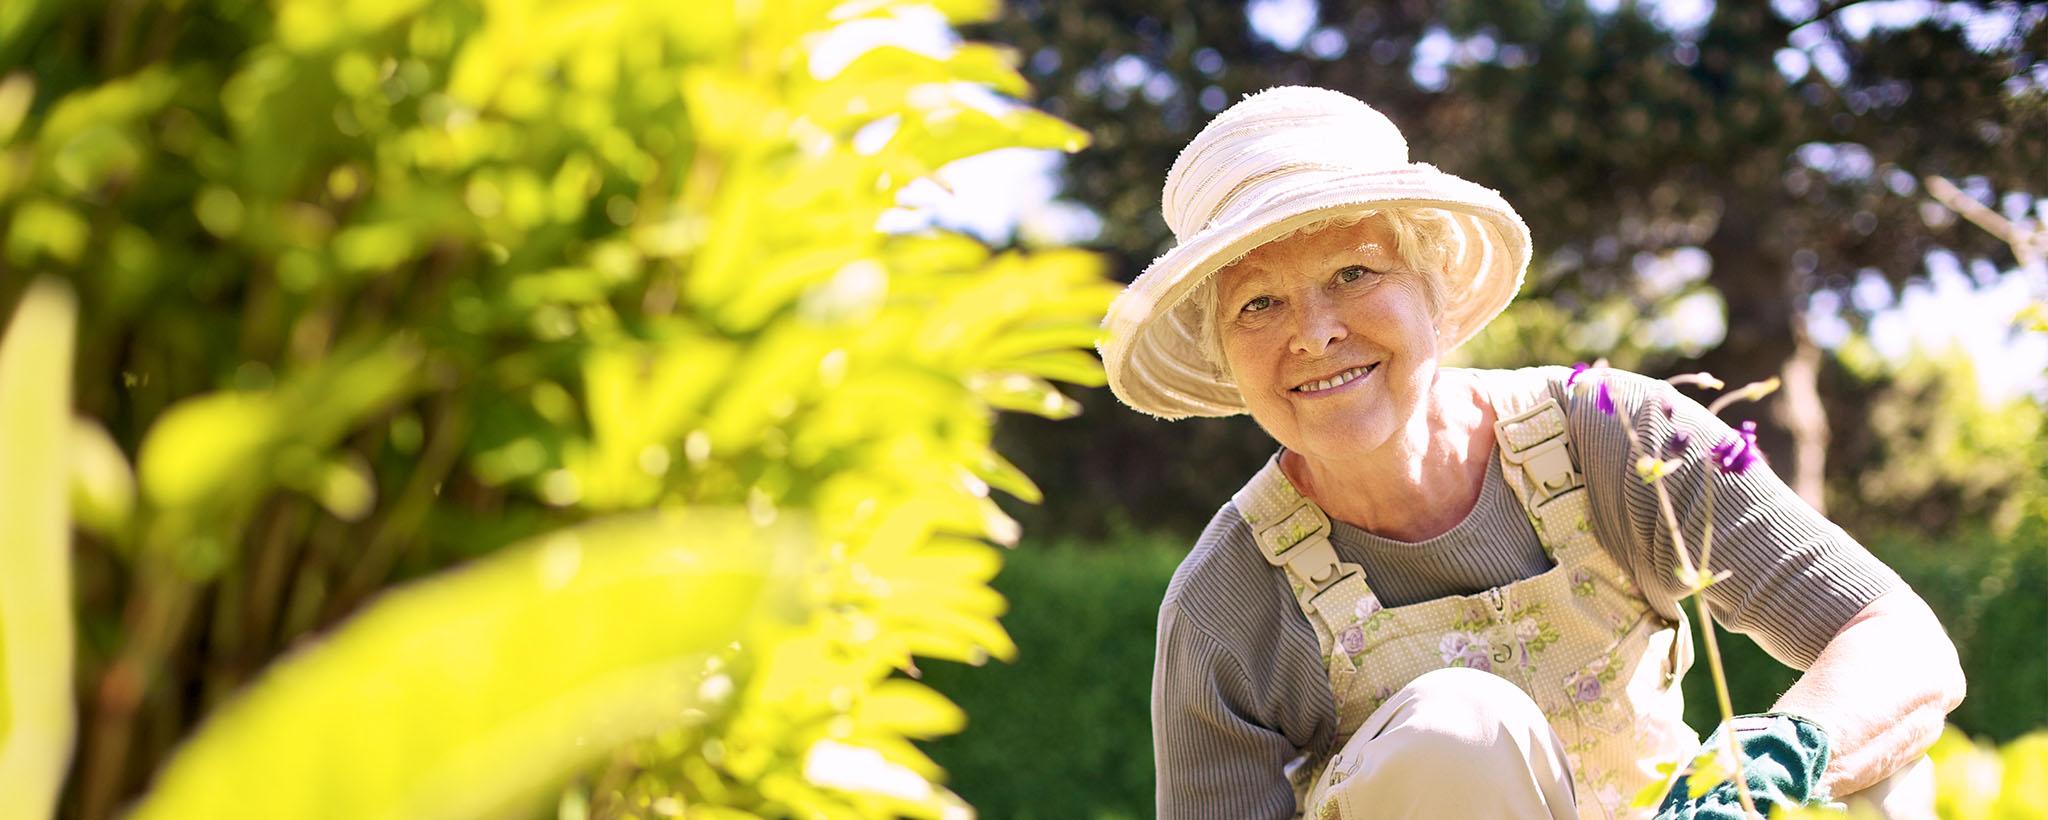 An older woman gardening in her hat and overalls